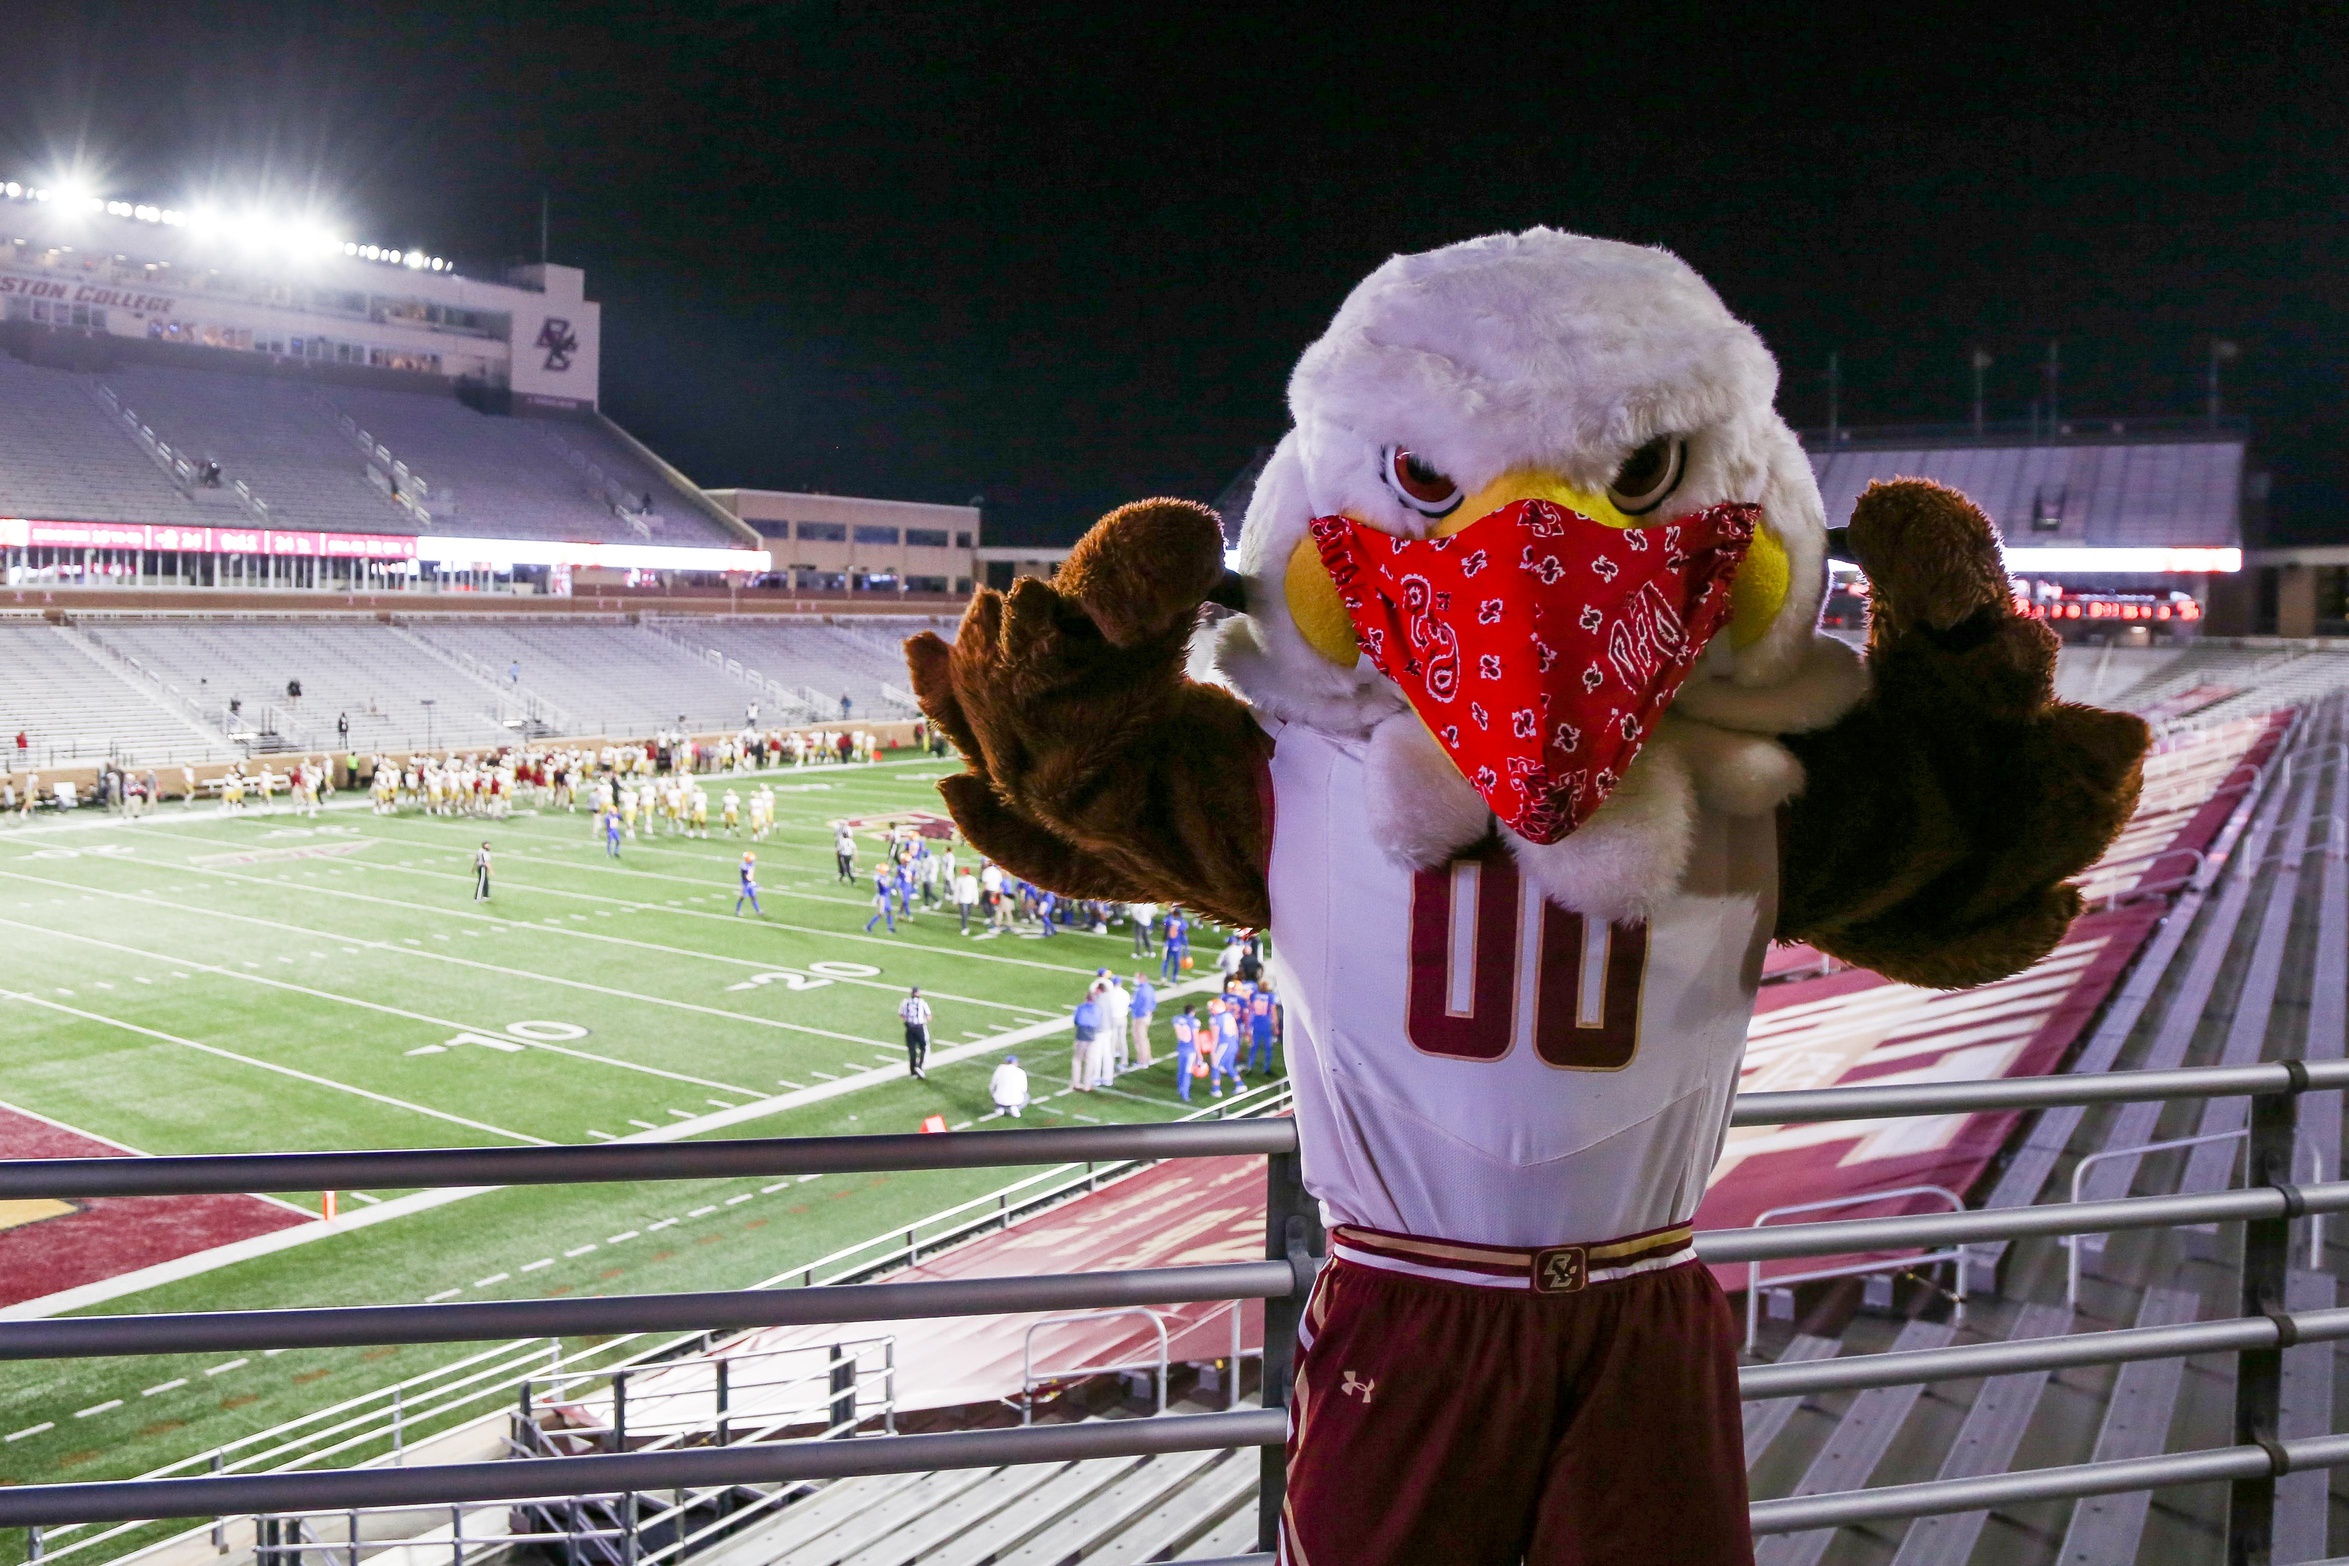 BC football 'For Welles' jerseys: The story behind Red Bandana Day